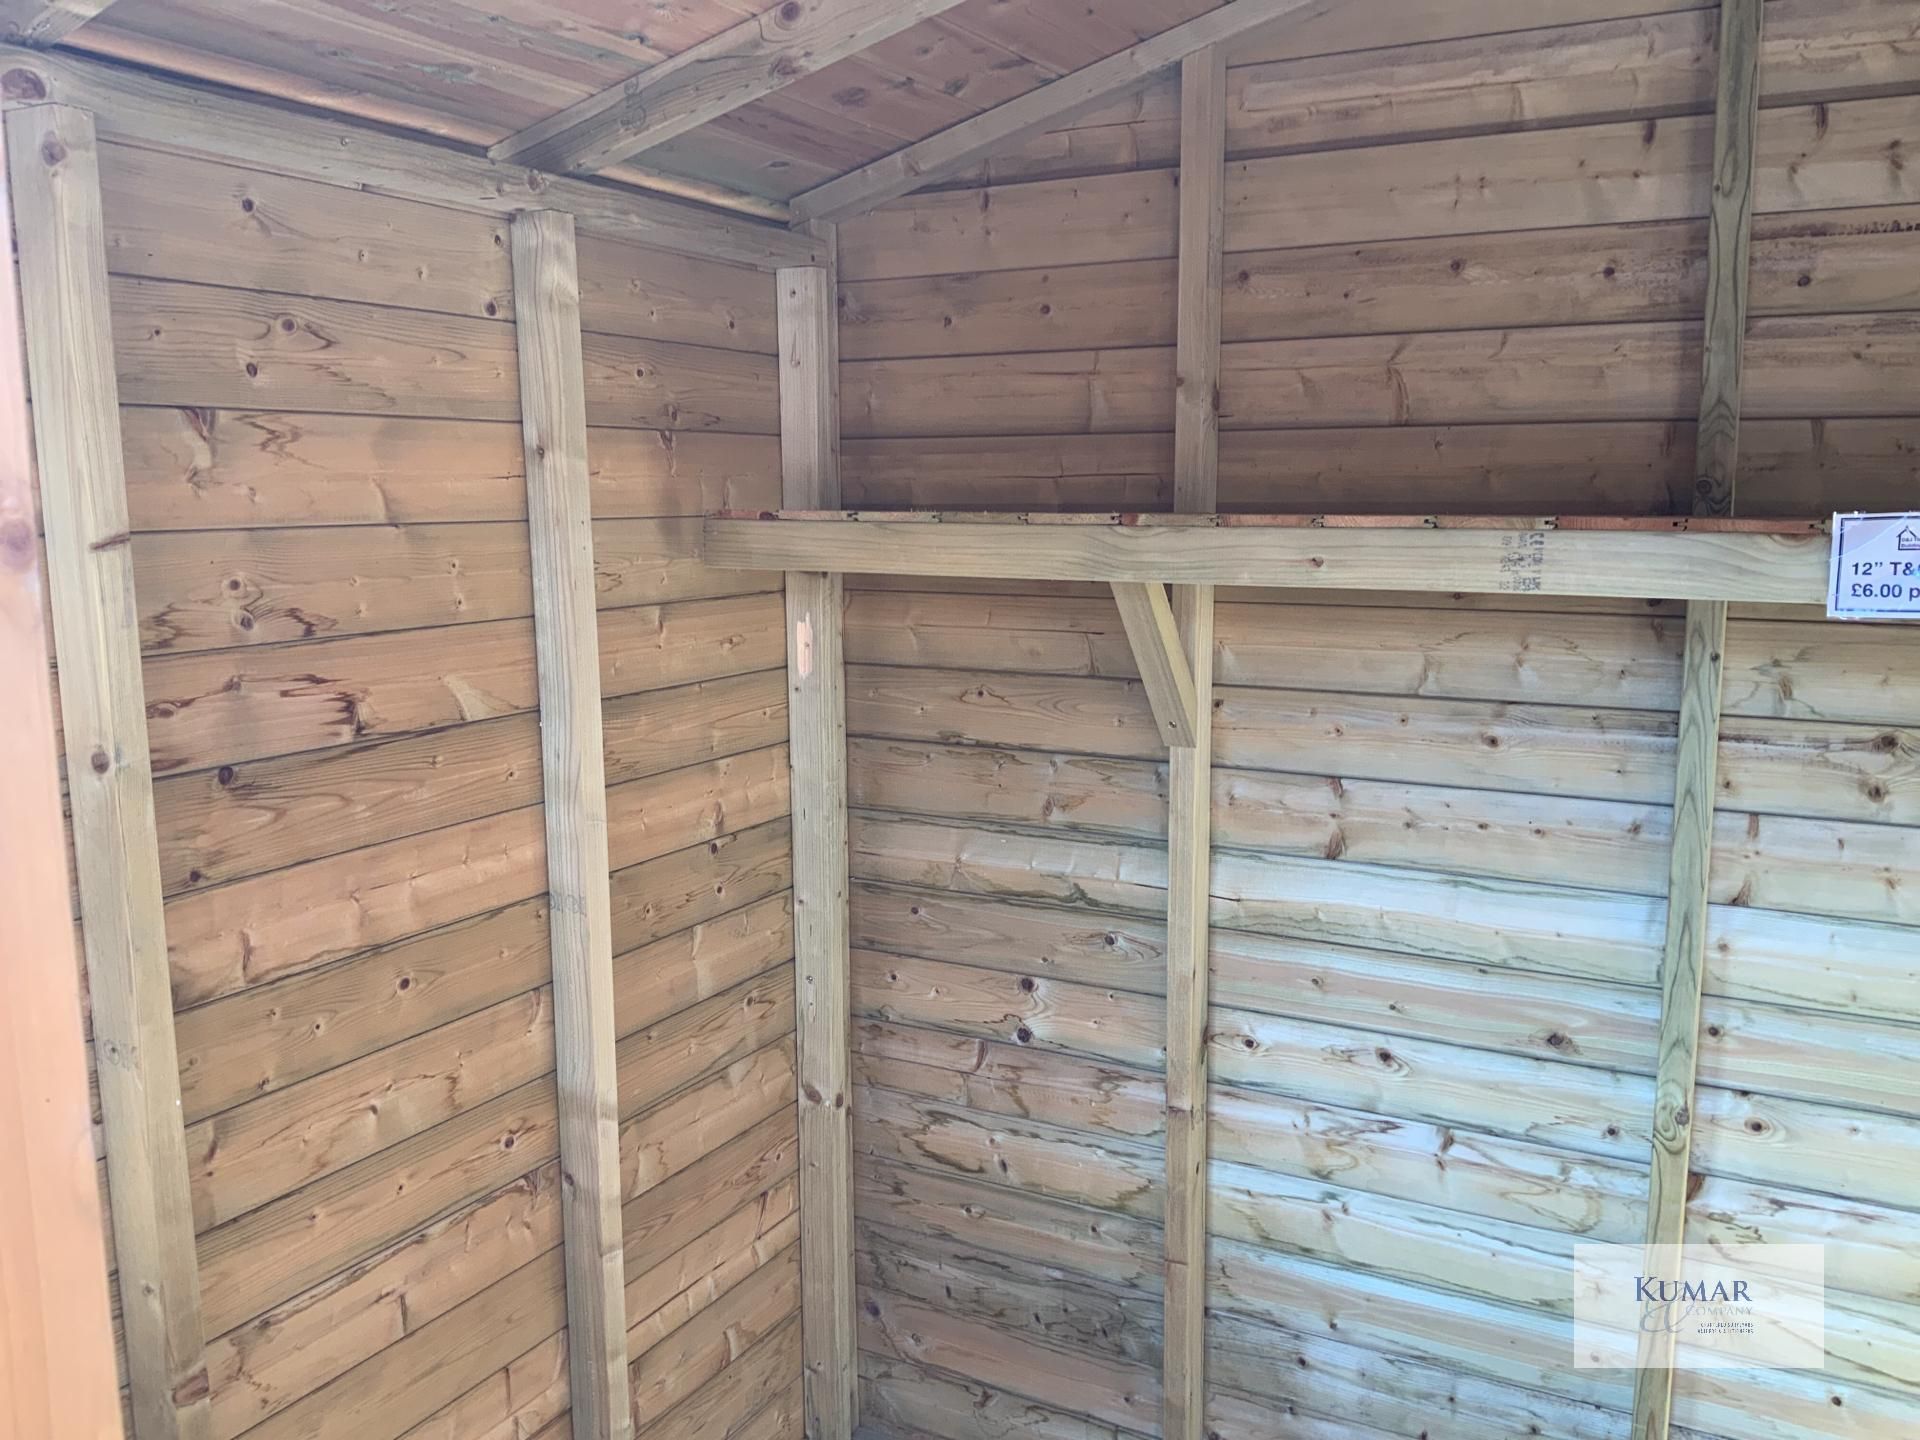 6 x 8 Reverse Apex Supreme Garden Shed with Window in Door, Supreme 19mm ShipLap, Oil Base Treatment - Image 8 of 10